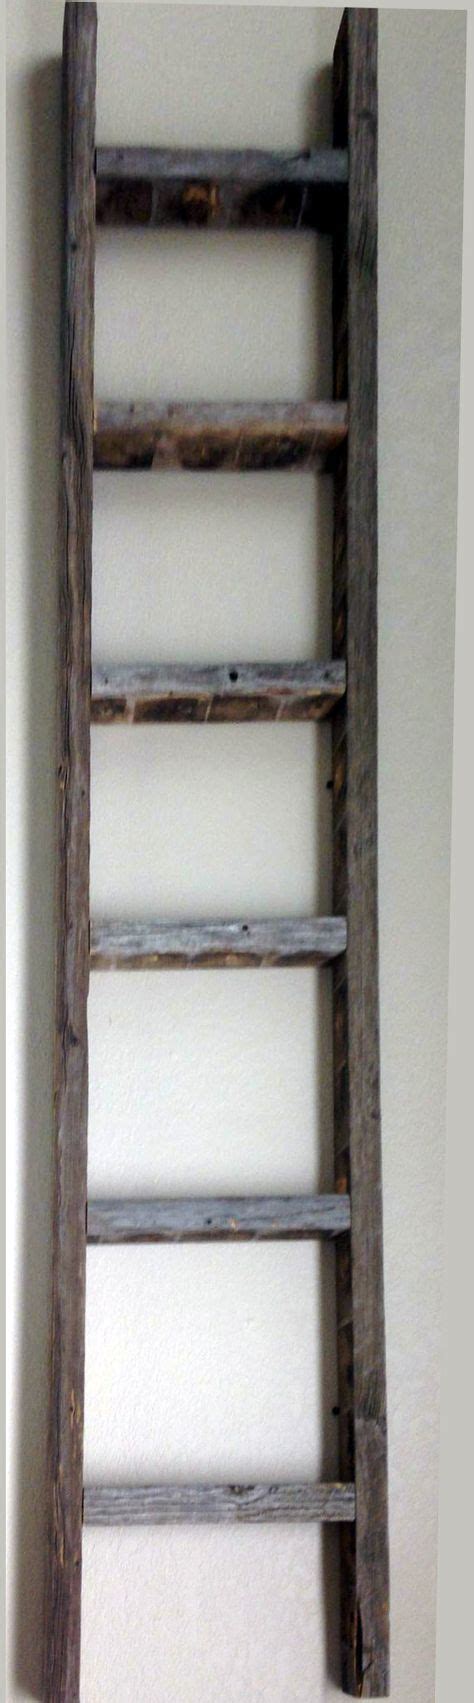 Decorative Ladder Reclaimed Old Wooden Ladder 6 Foot Rustic Barn Wood